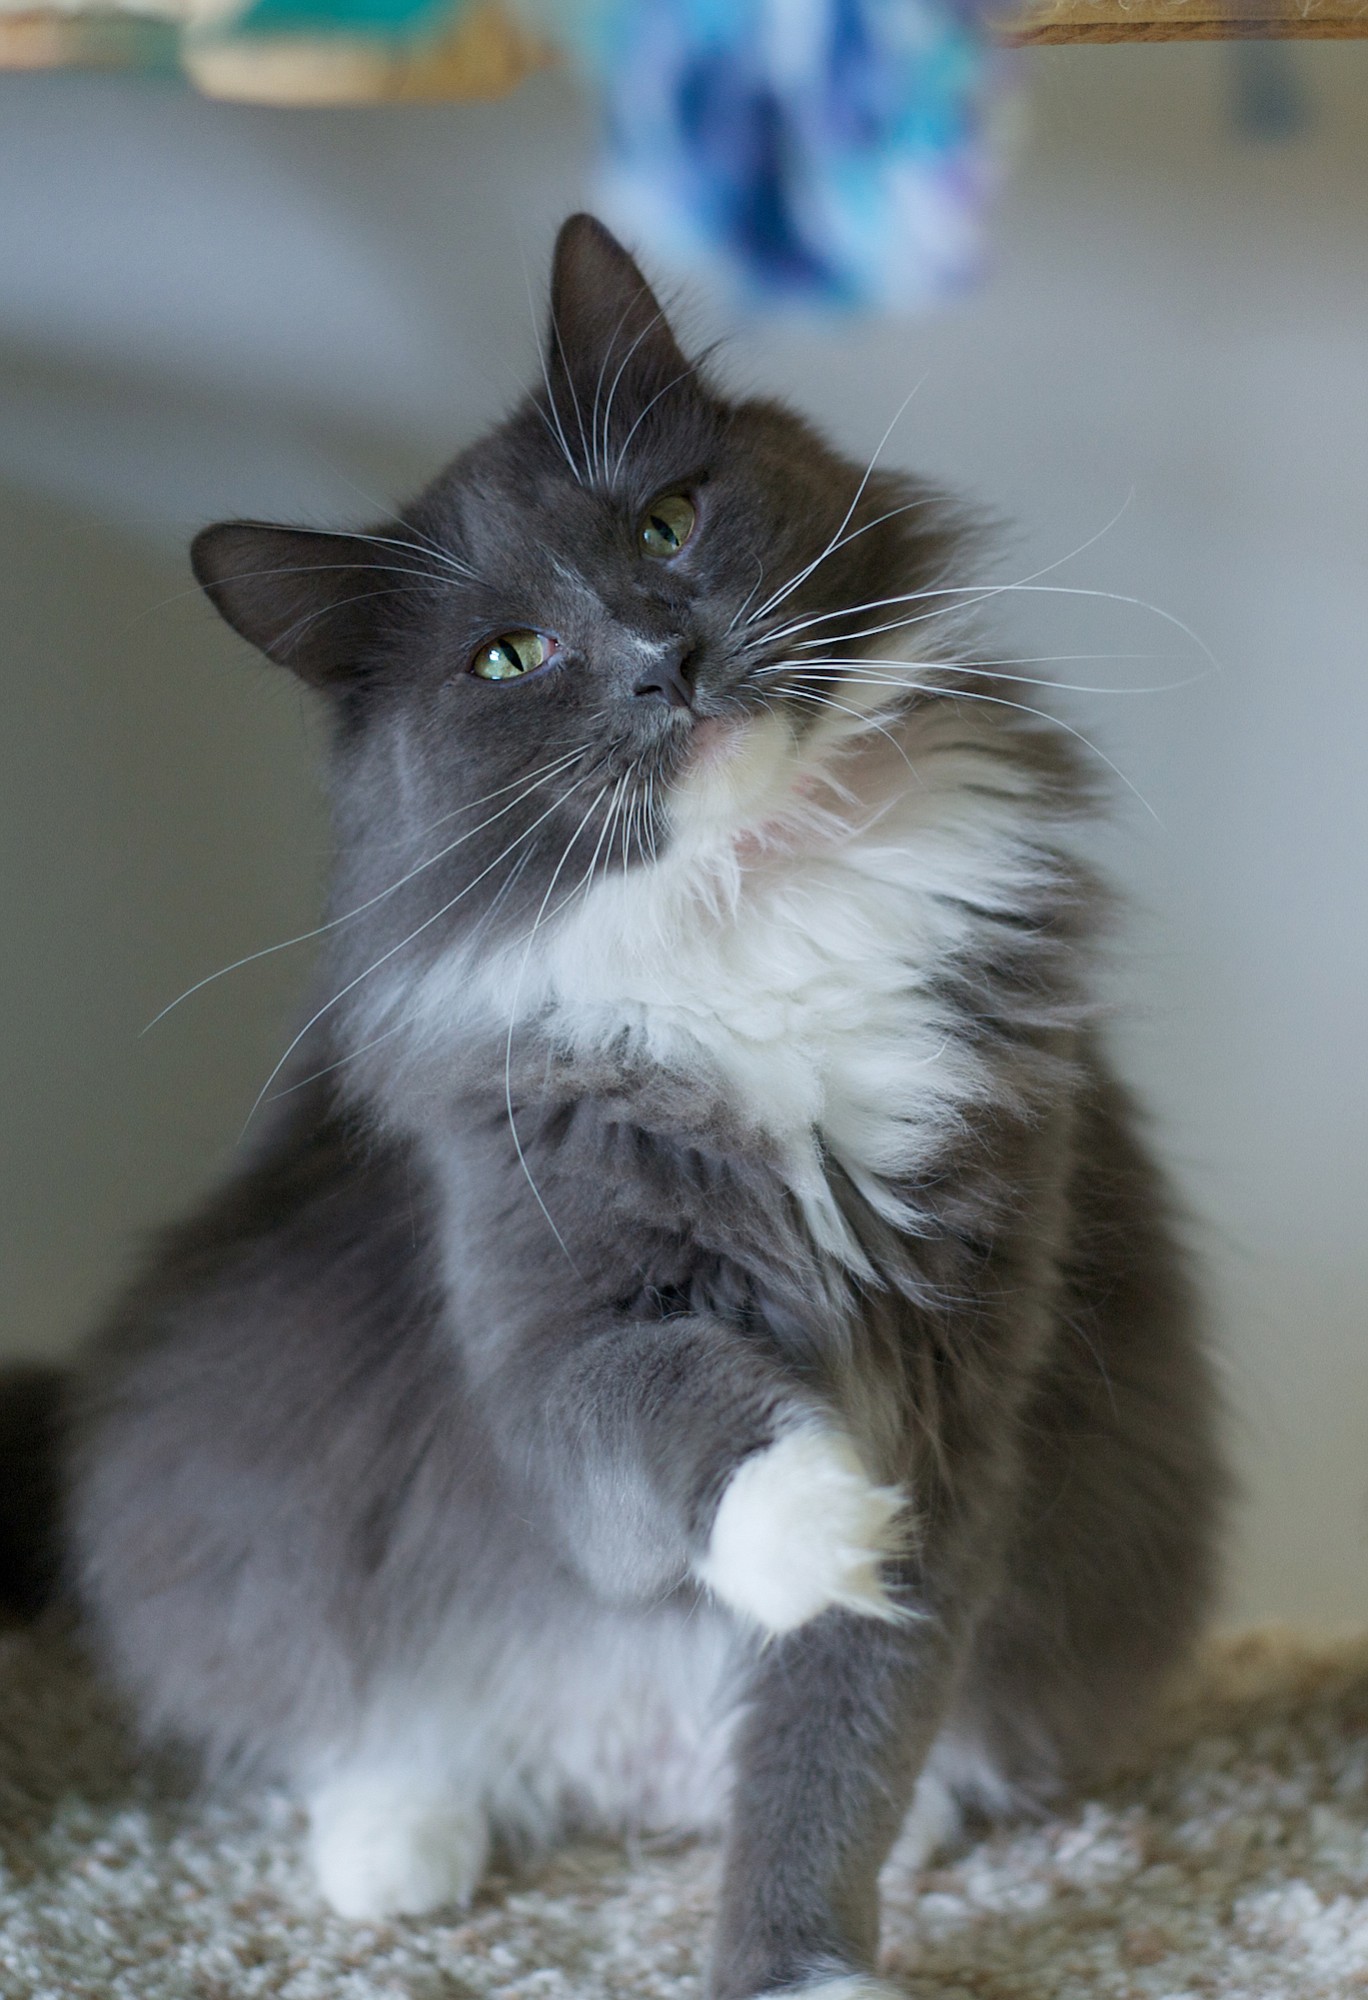 Mammacita is almost 2 years old. This girl with bright-green eyes had a litter upon arriving at the shelter. She will need regular brushing to keep her long fur pretty. She is very playful and loves toys, but can be quiet at times.